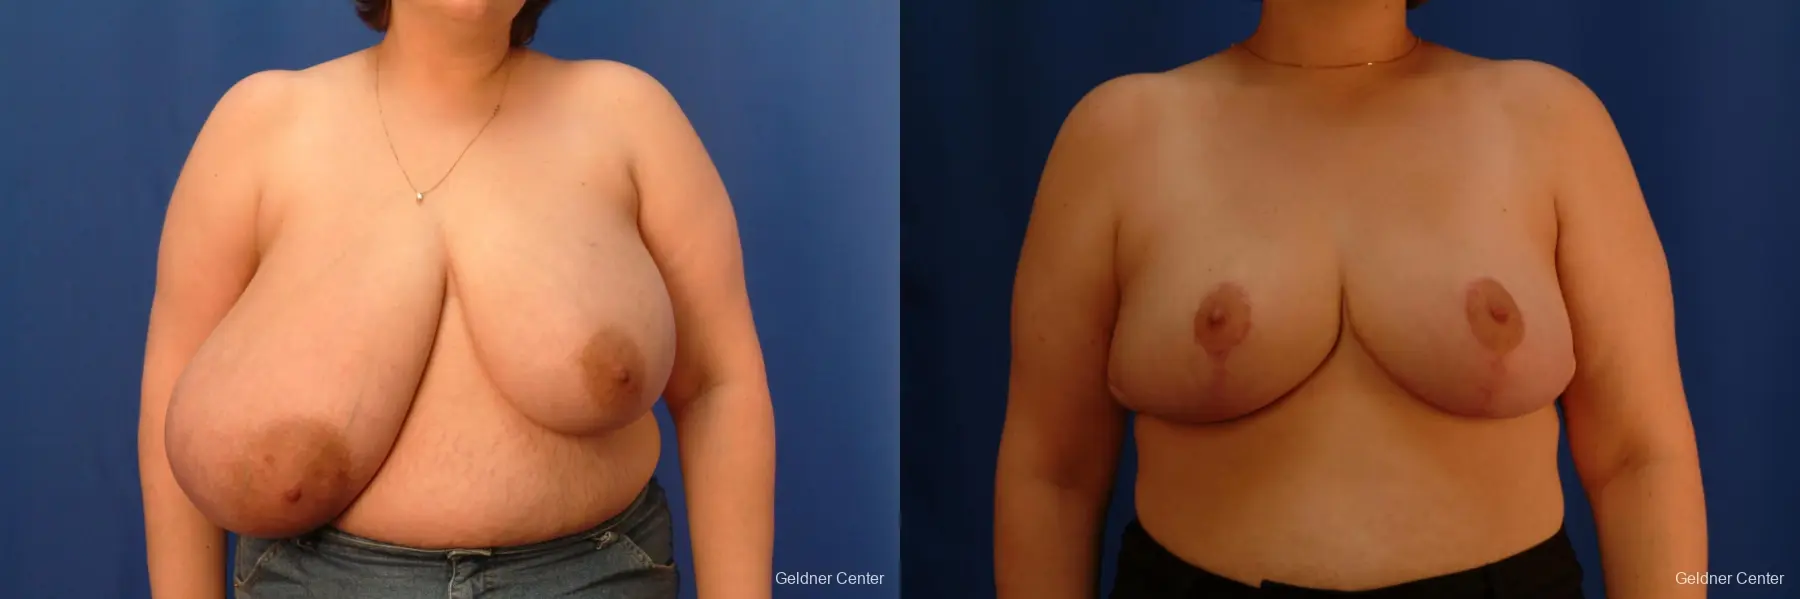 Breast Reduction Streeterville, Chicago 2522 - Before and After